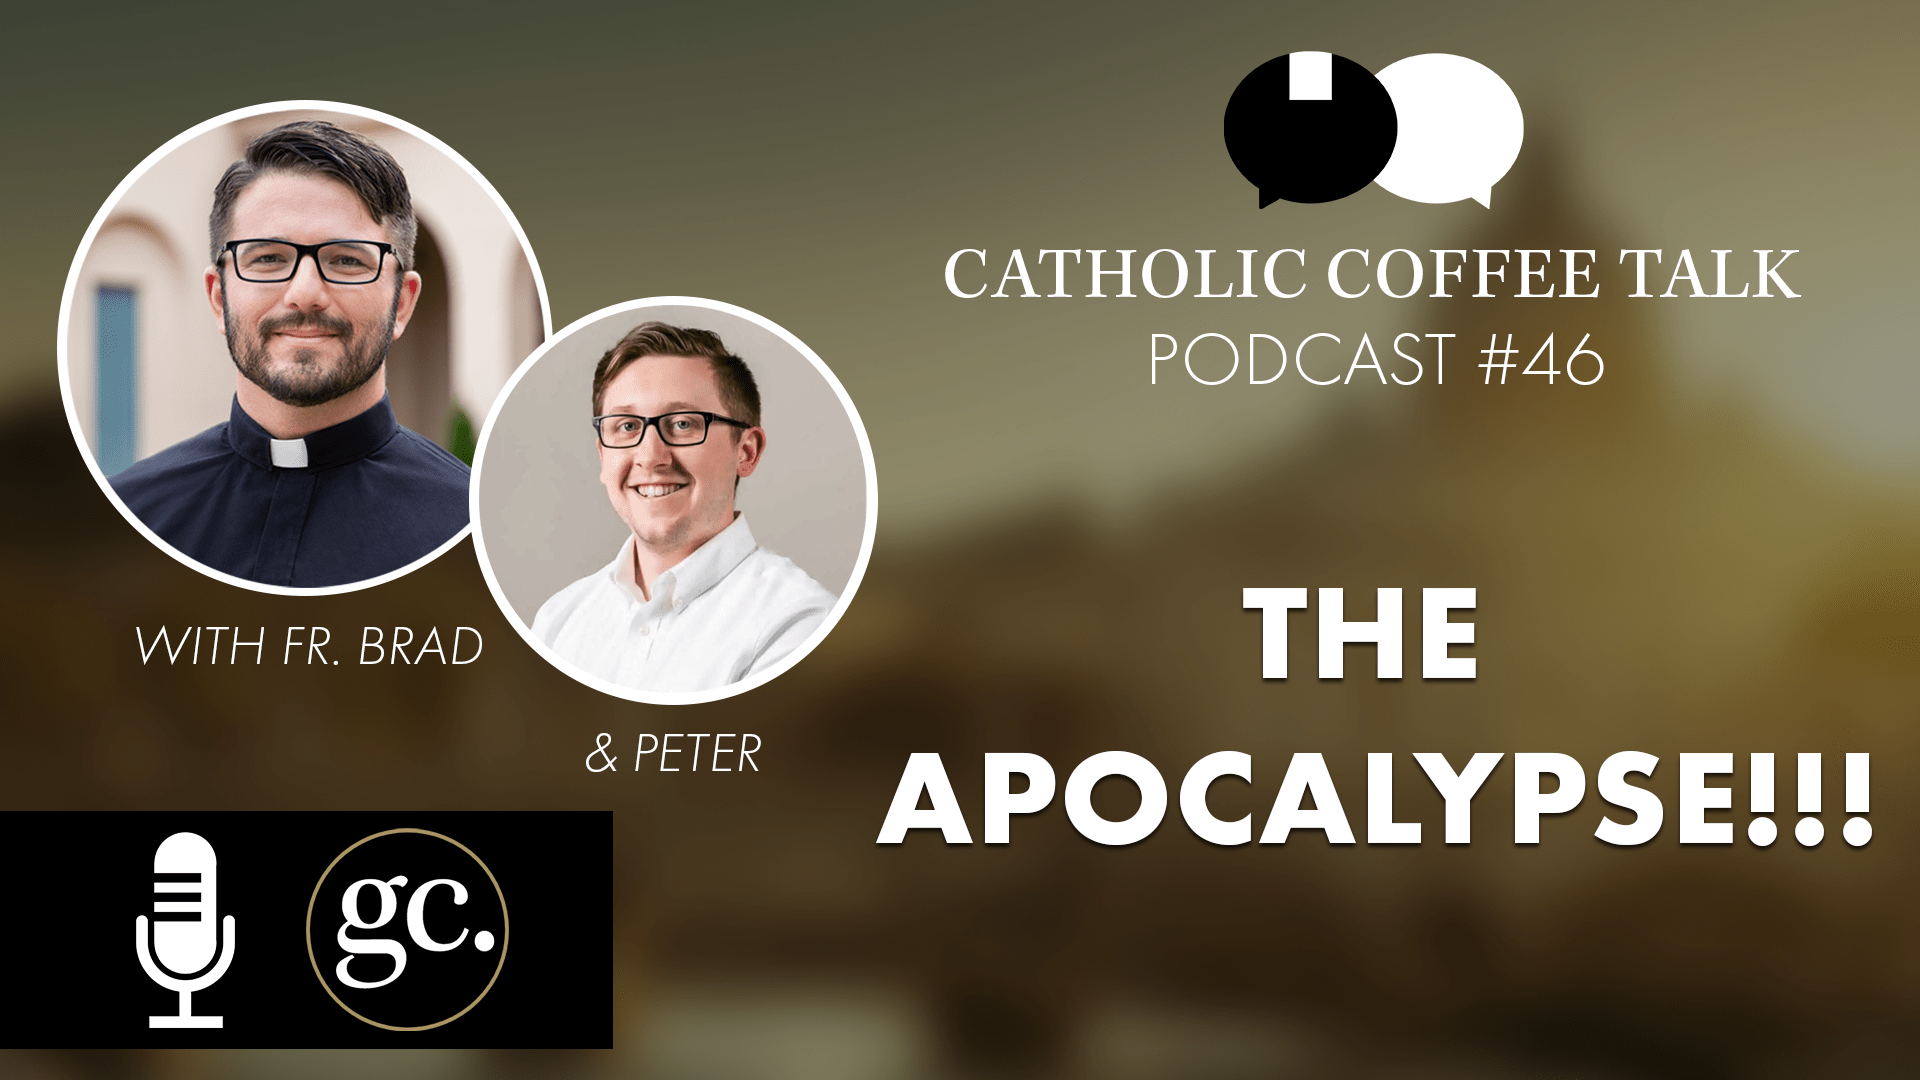 Let’s Talk About the End of the World | Catholic Coffee Talk #46